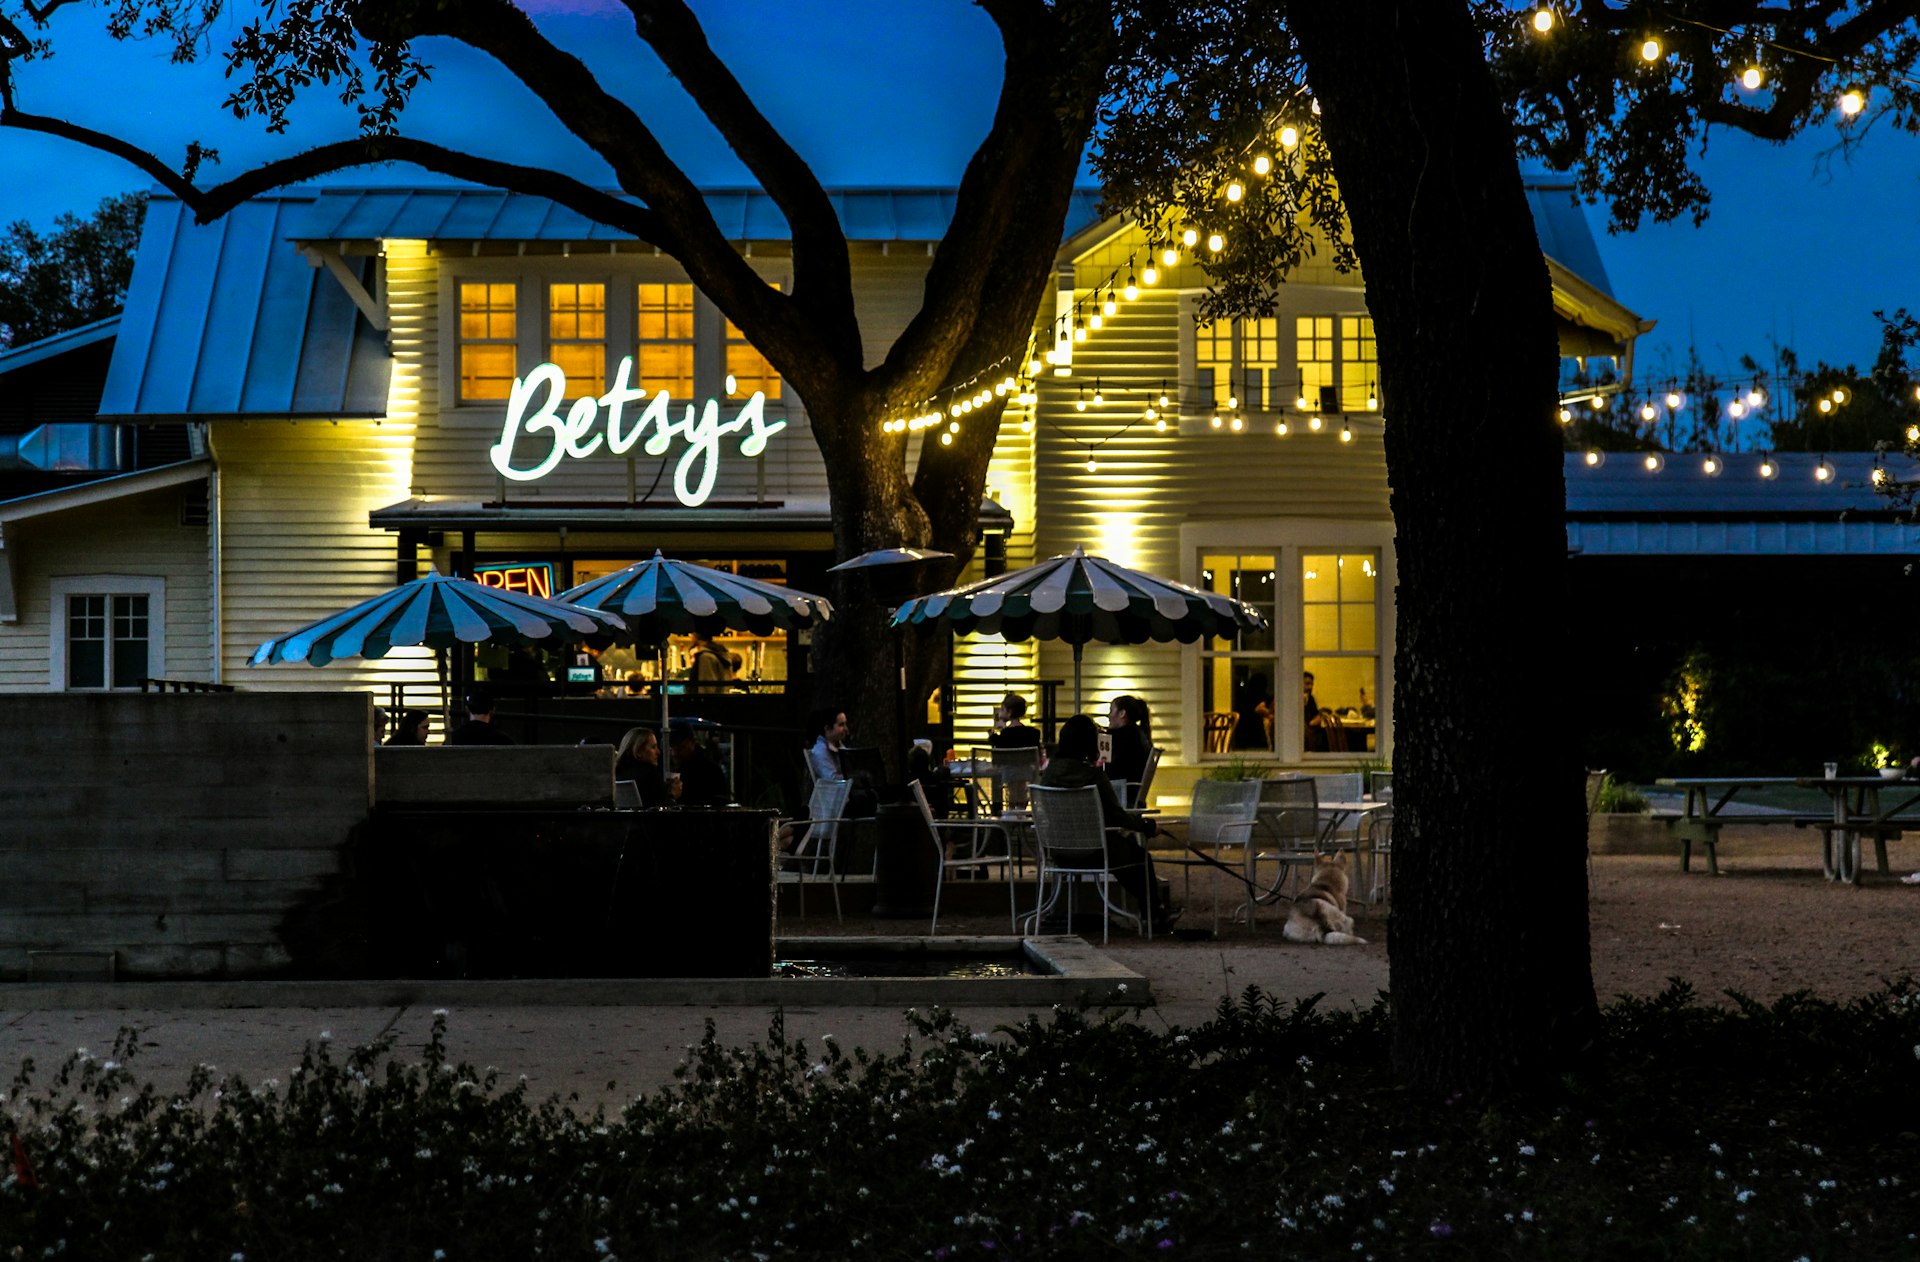 A sign above a restaurant at dusk reading "Betsy's"